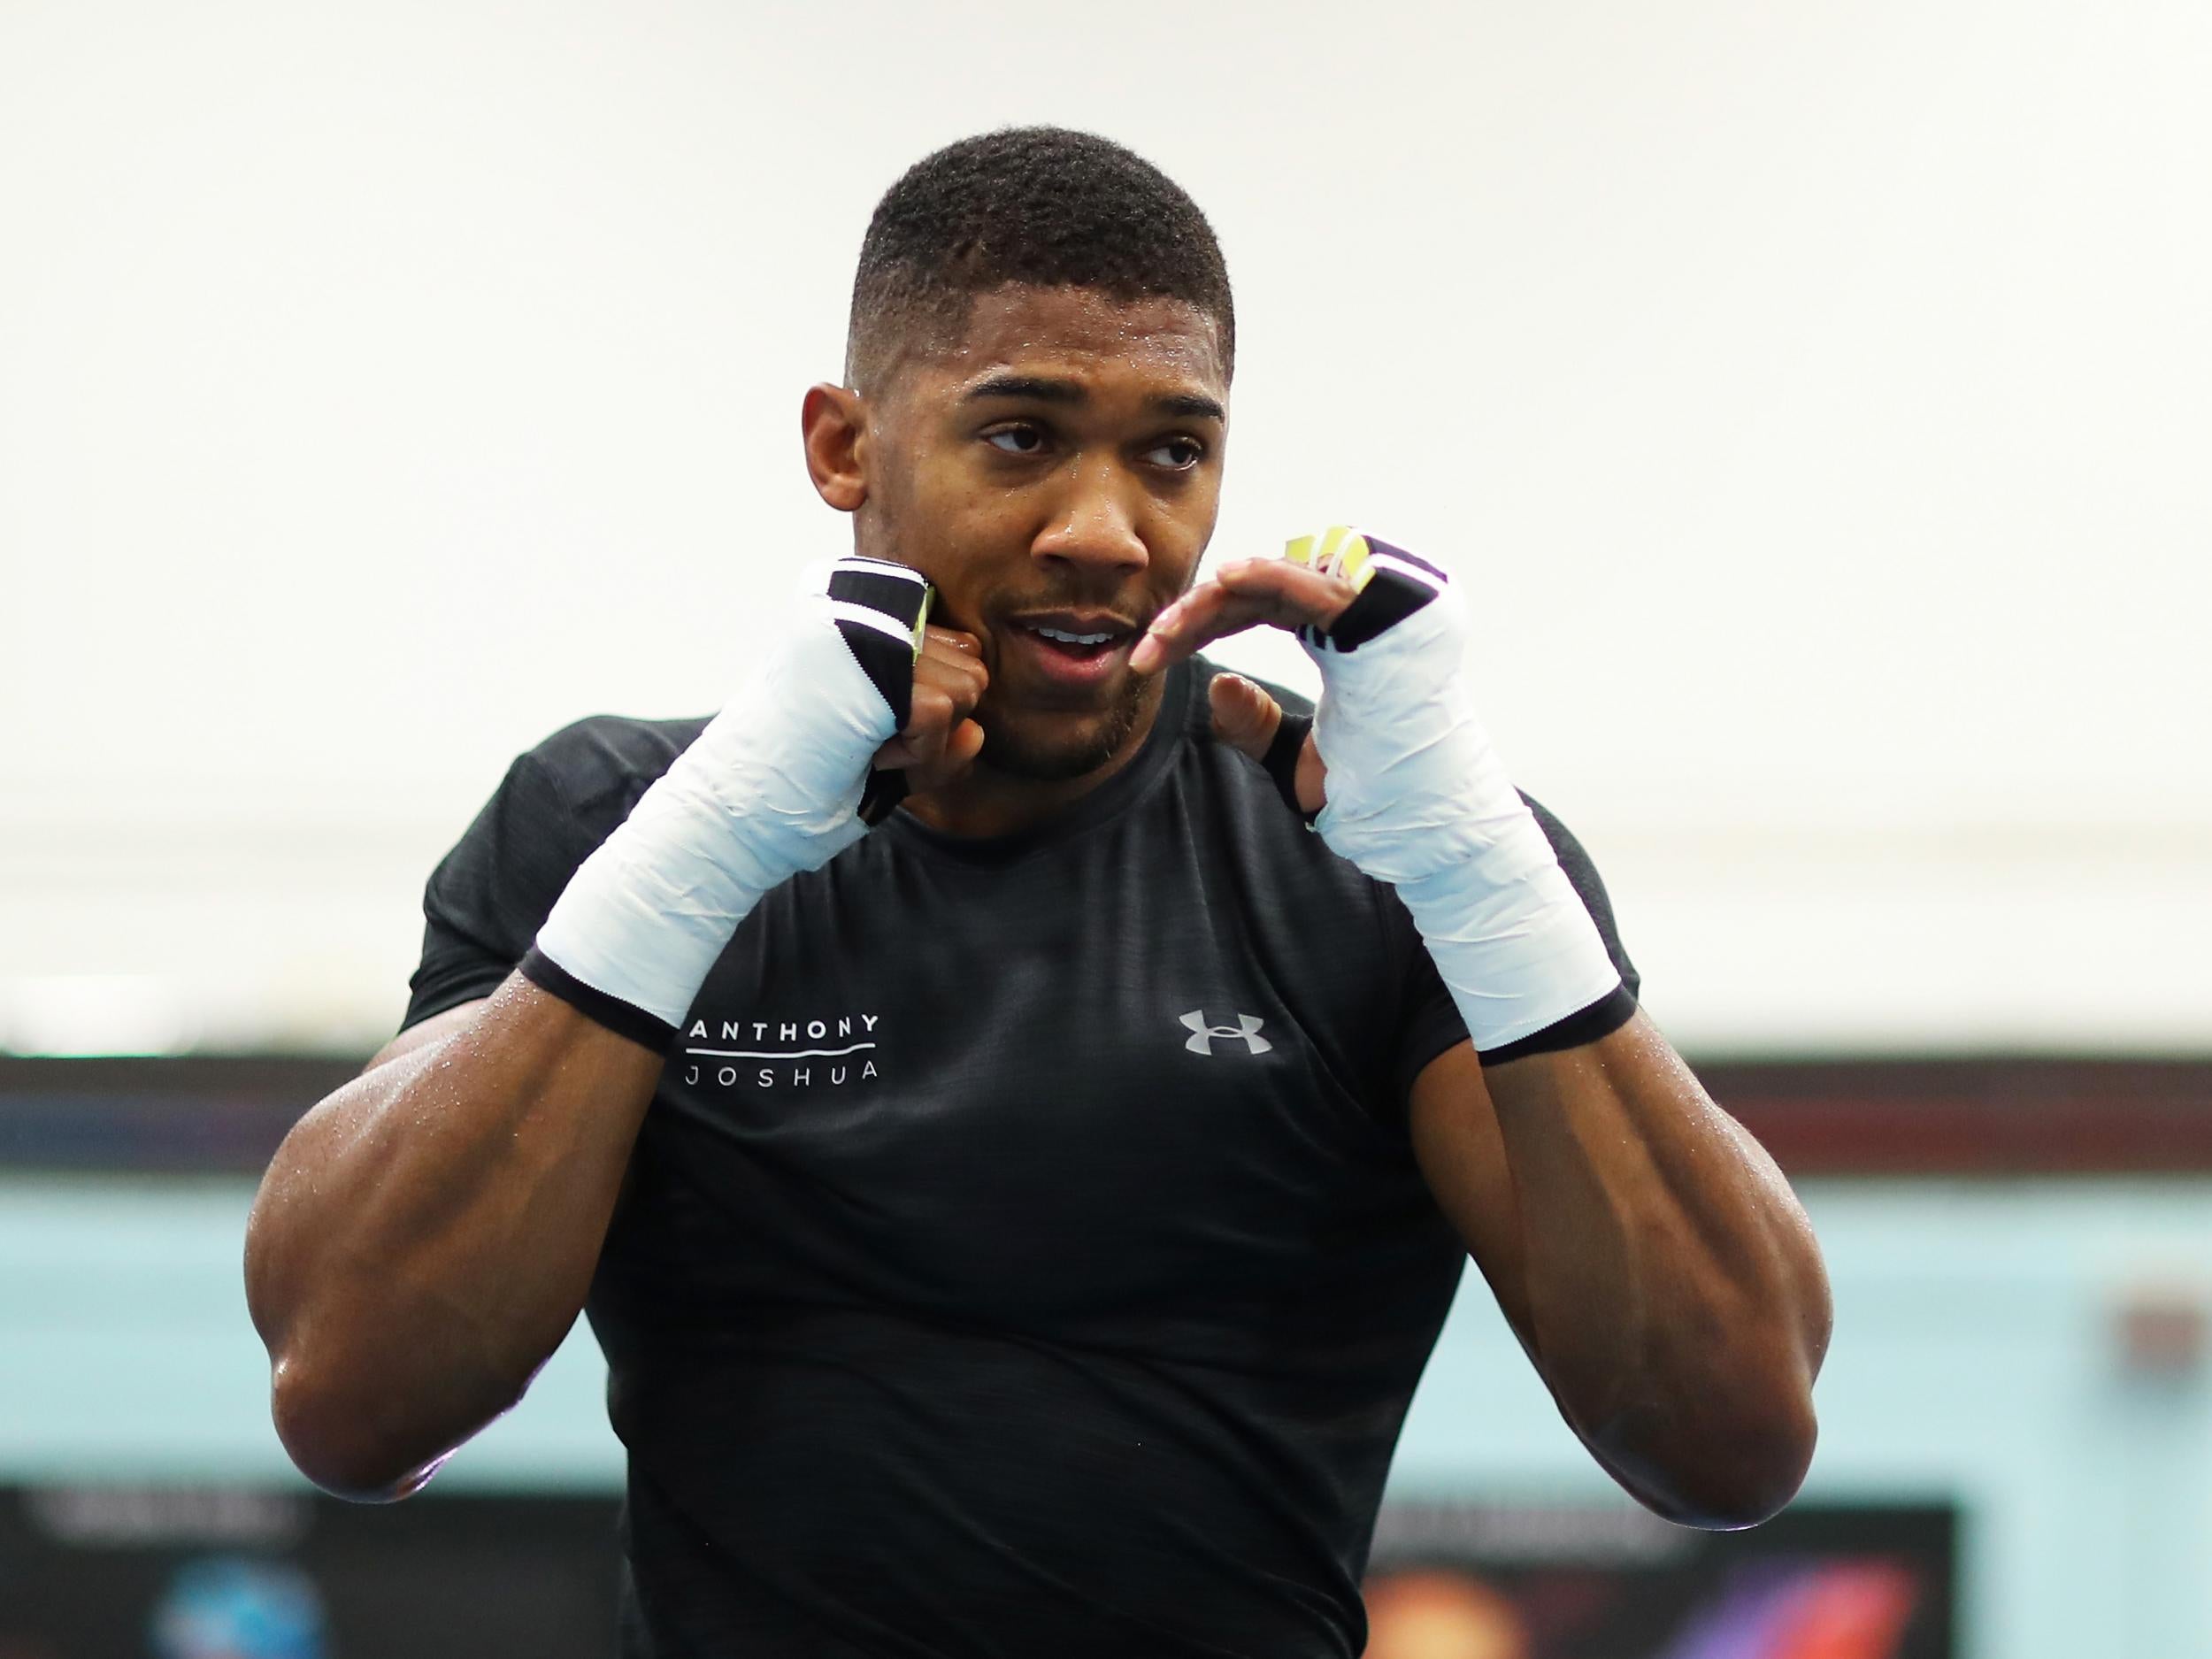 Joshua will take to the ring for the first time this Saturday since April's fight at Wembley